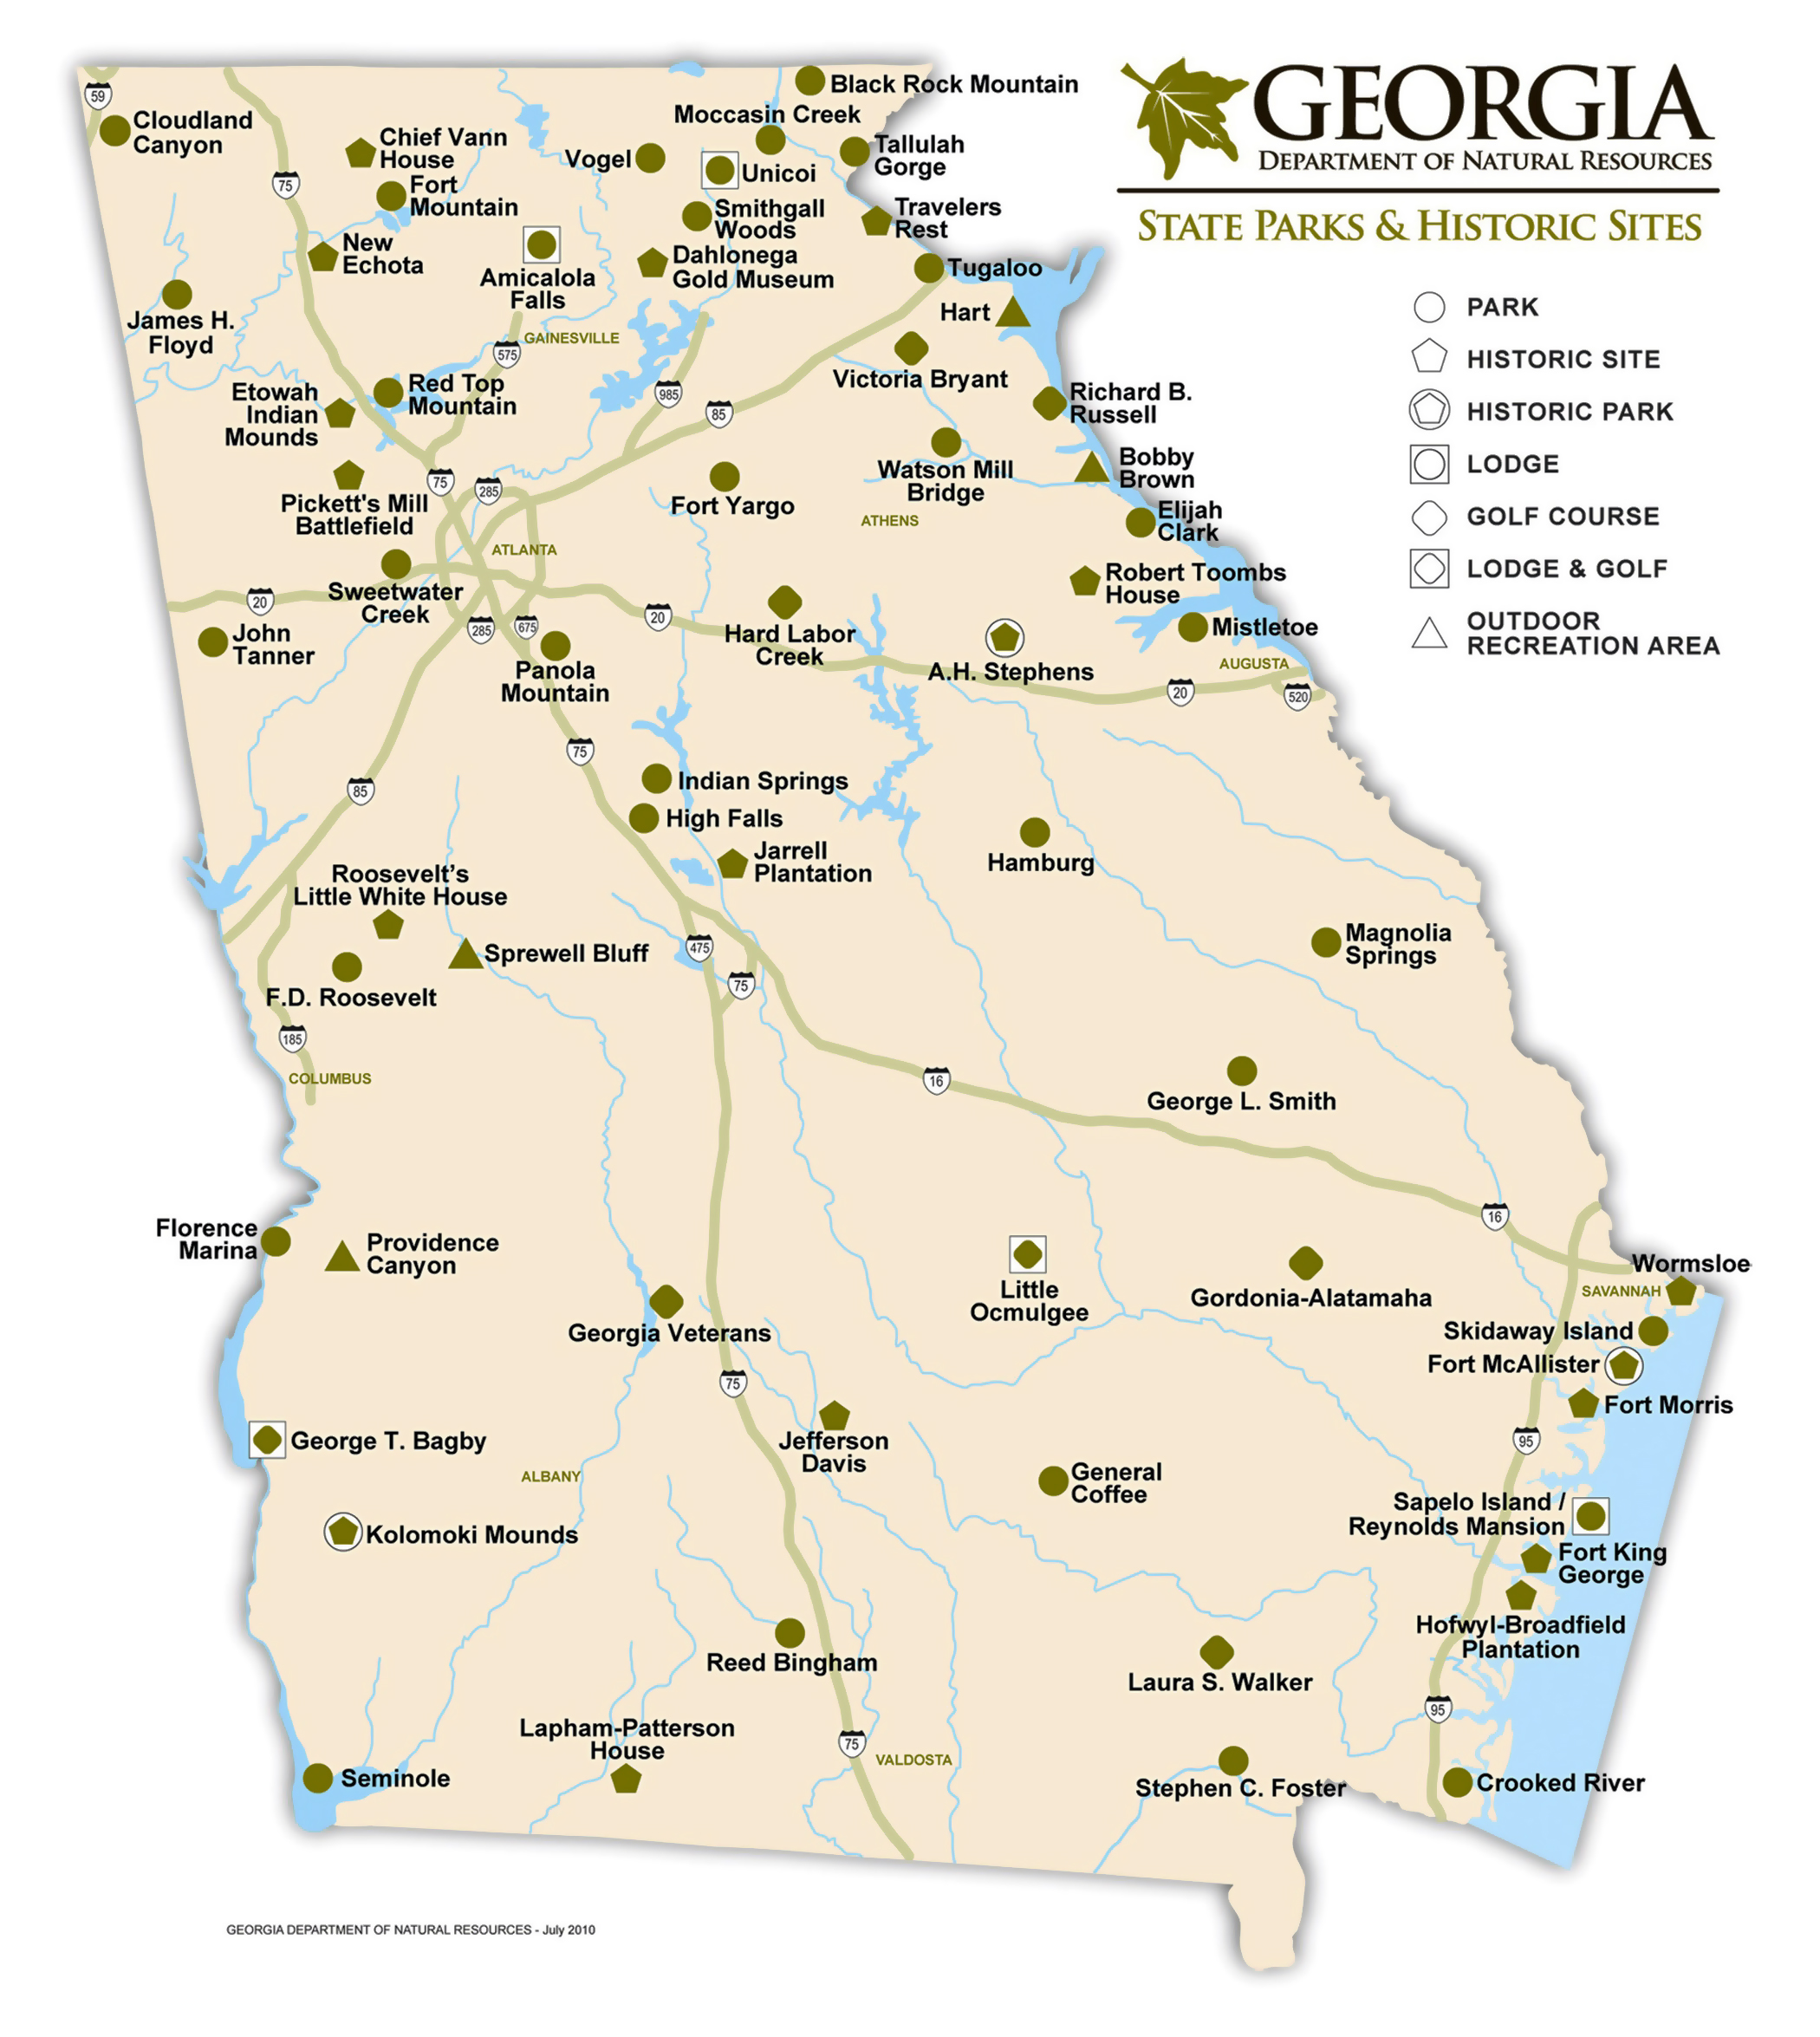 Large Detailed State Parks And Historic Sites Map Of Georgia Georgia